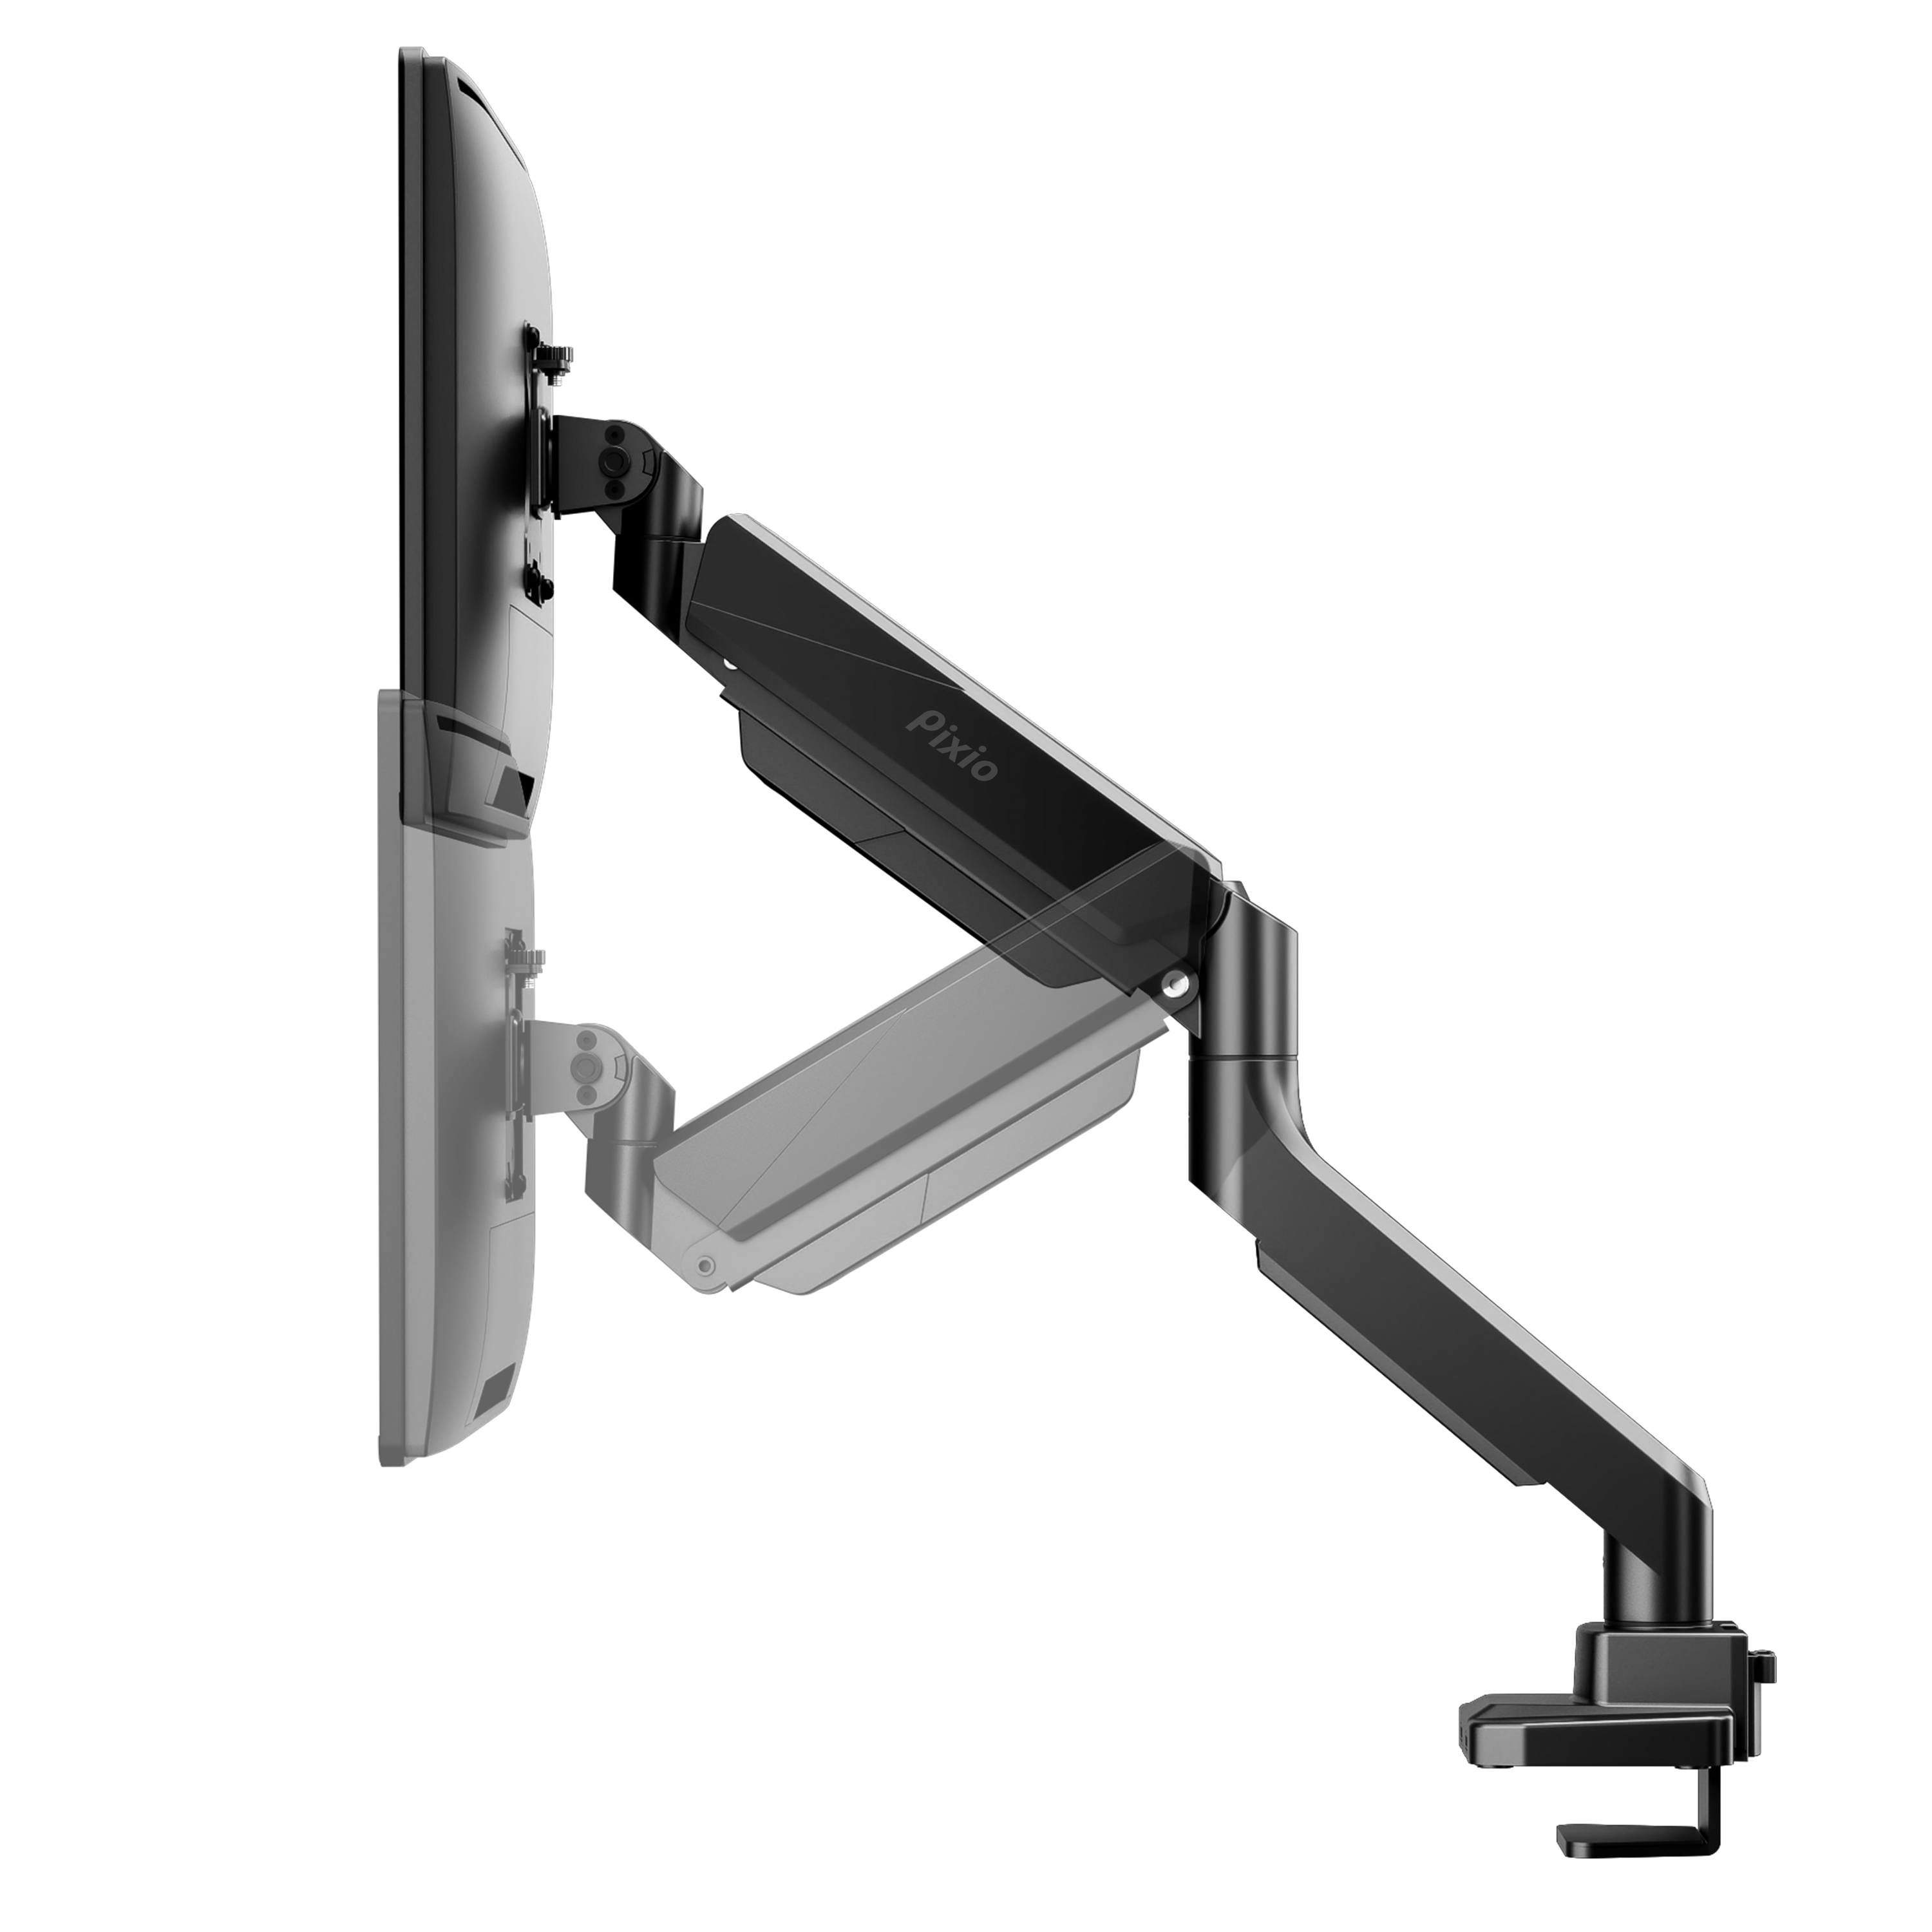 Pixio P-400 VESA Mounting Gaming Monitor Stand Mount - VESA 100x100 or  75x75 Compatible, Tilt, Swivel, Height Adjustable Elevate, Pivot up to 32  inch Monitor (4ca74f9d908ae10a0dc8a71b109f87bb) - PCPartPicker